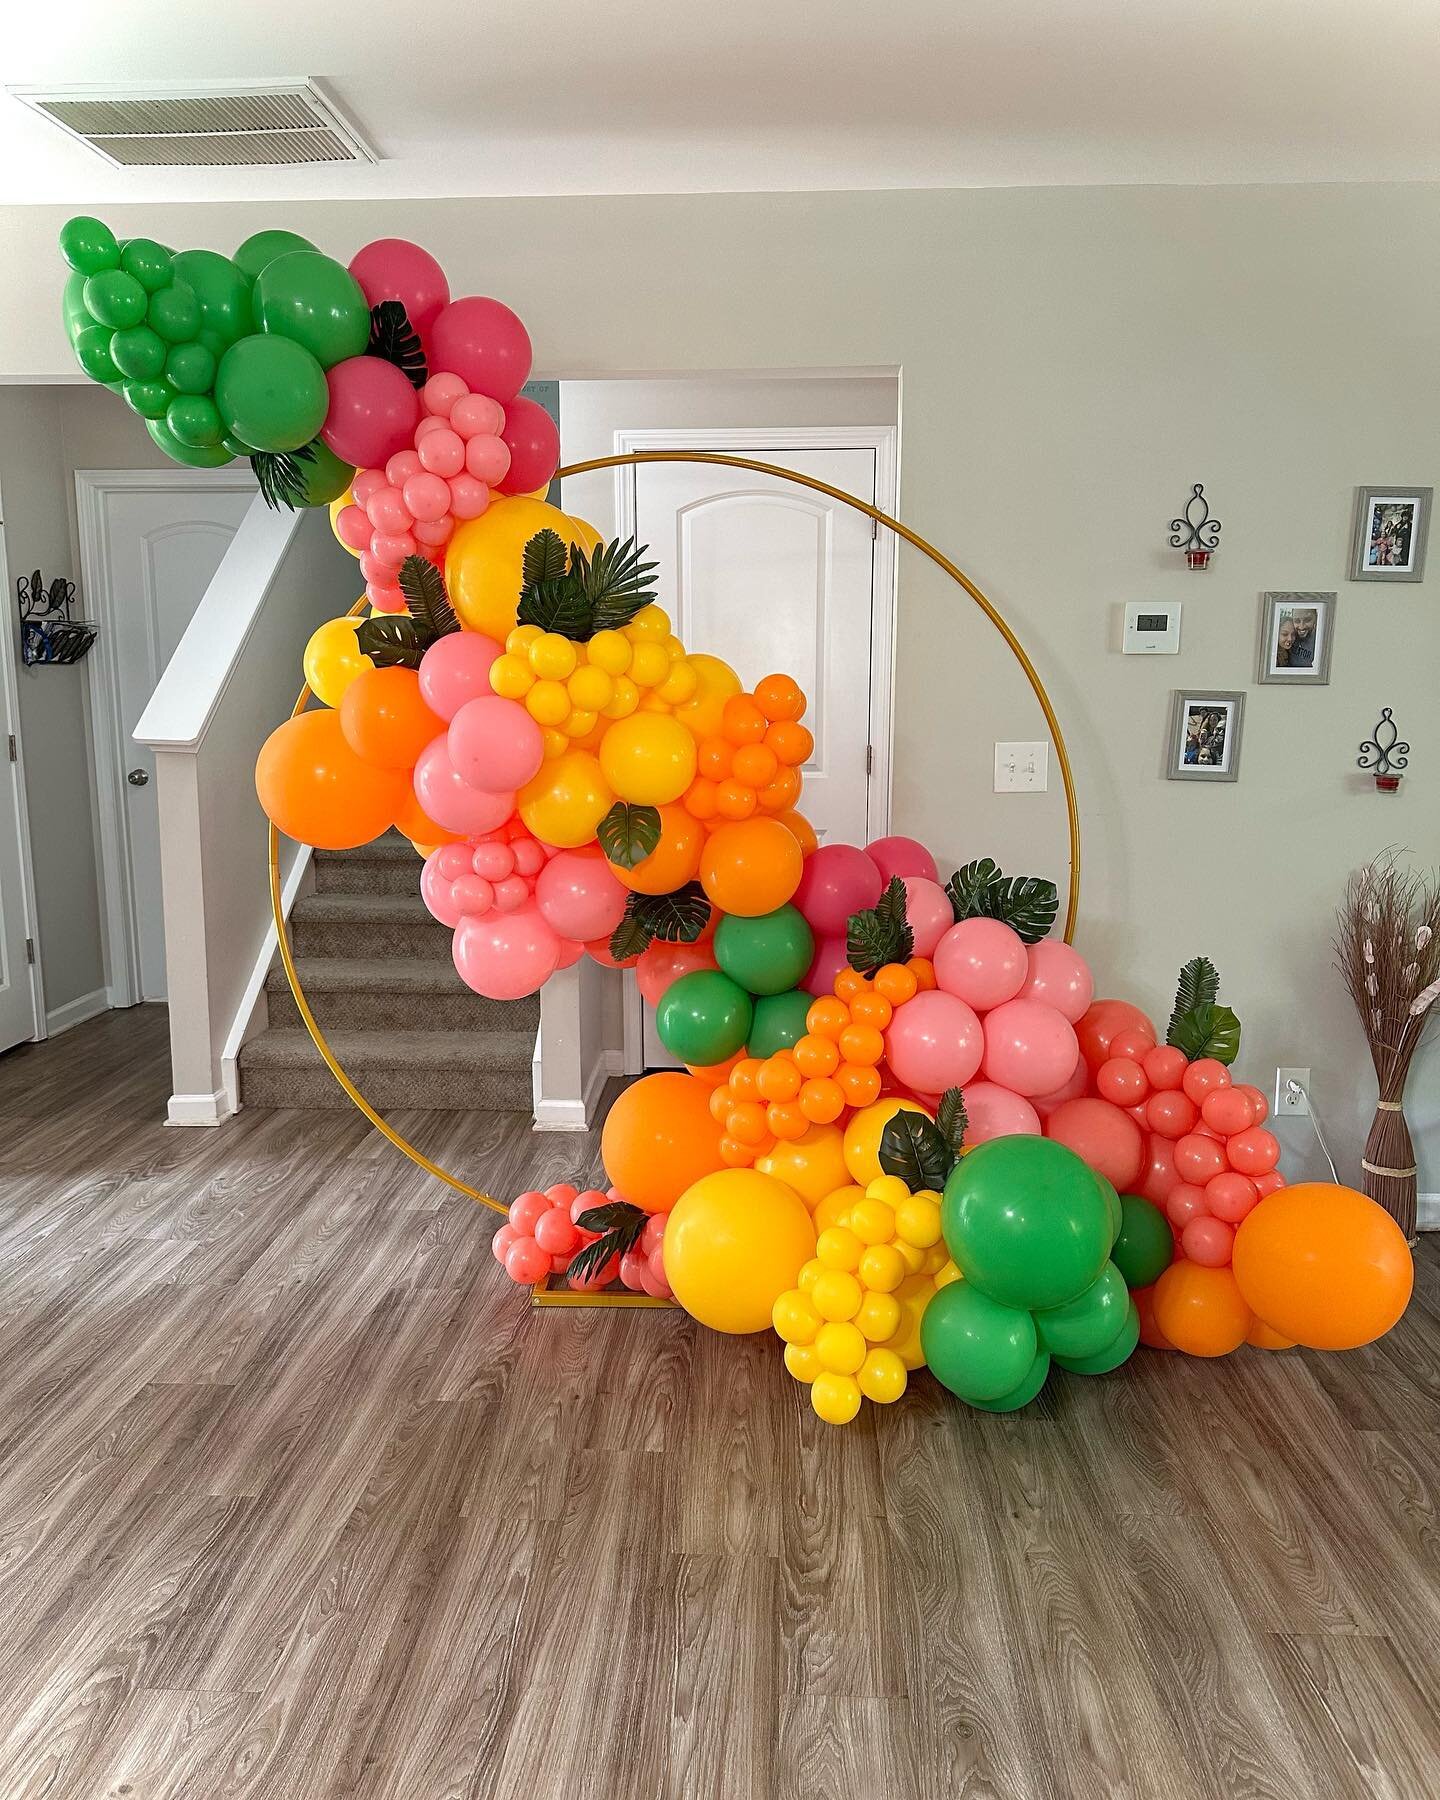 Tropical Vibe&rsquo;s! 

How pretty are these colors!
&bull;
&bull;
&bull;
#tropicalbirthday #tropicaltheme #balloons #charlotte #charlotteballoonartist #charlotteballoons